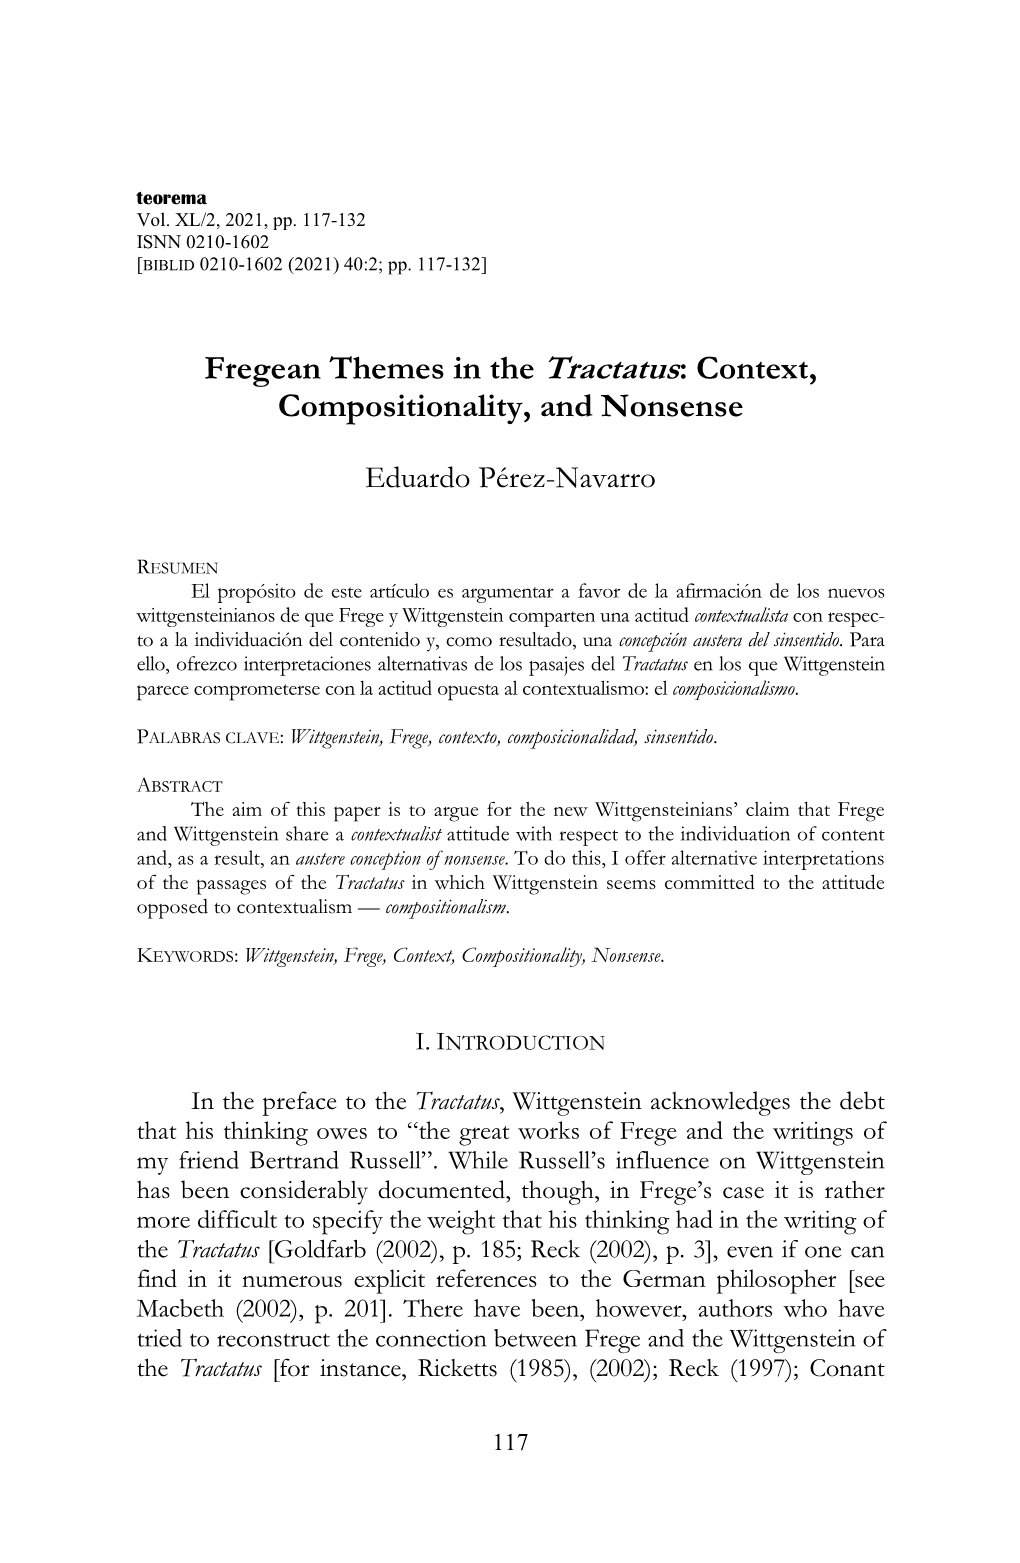 Fregean Themes in the Tractatus: Context, Compositionality, and Nonsense